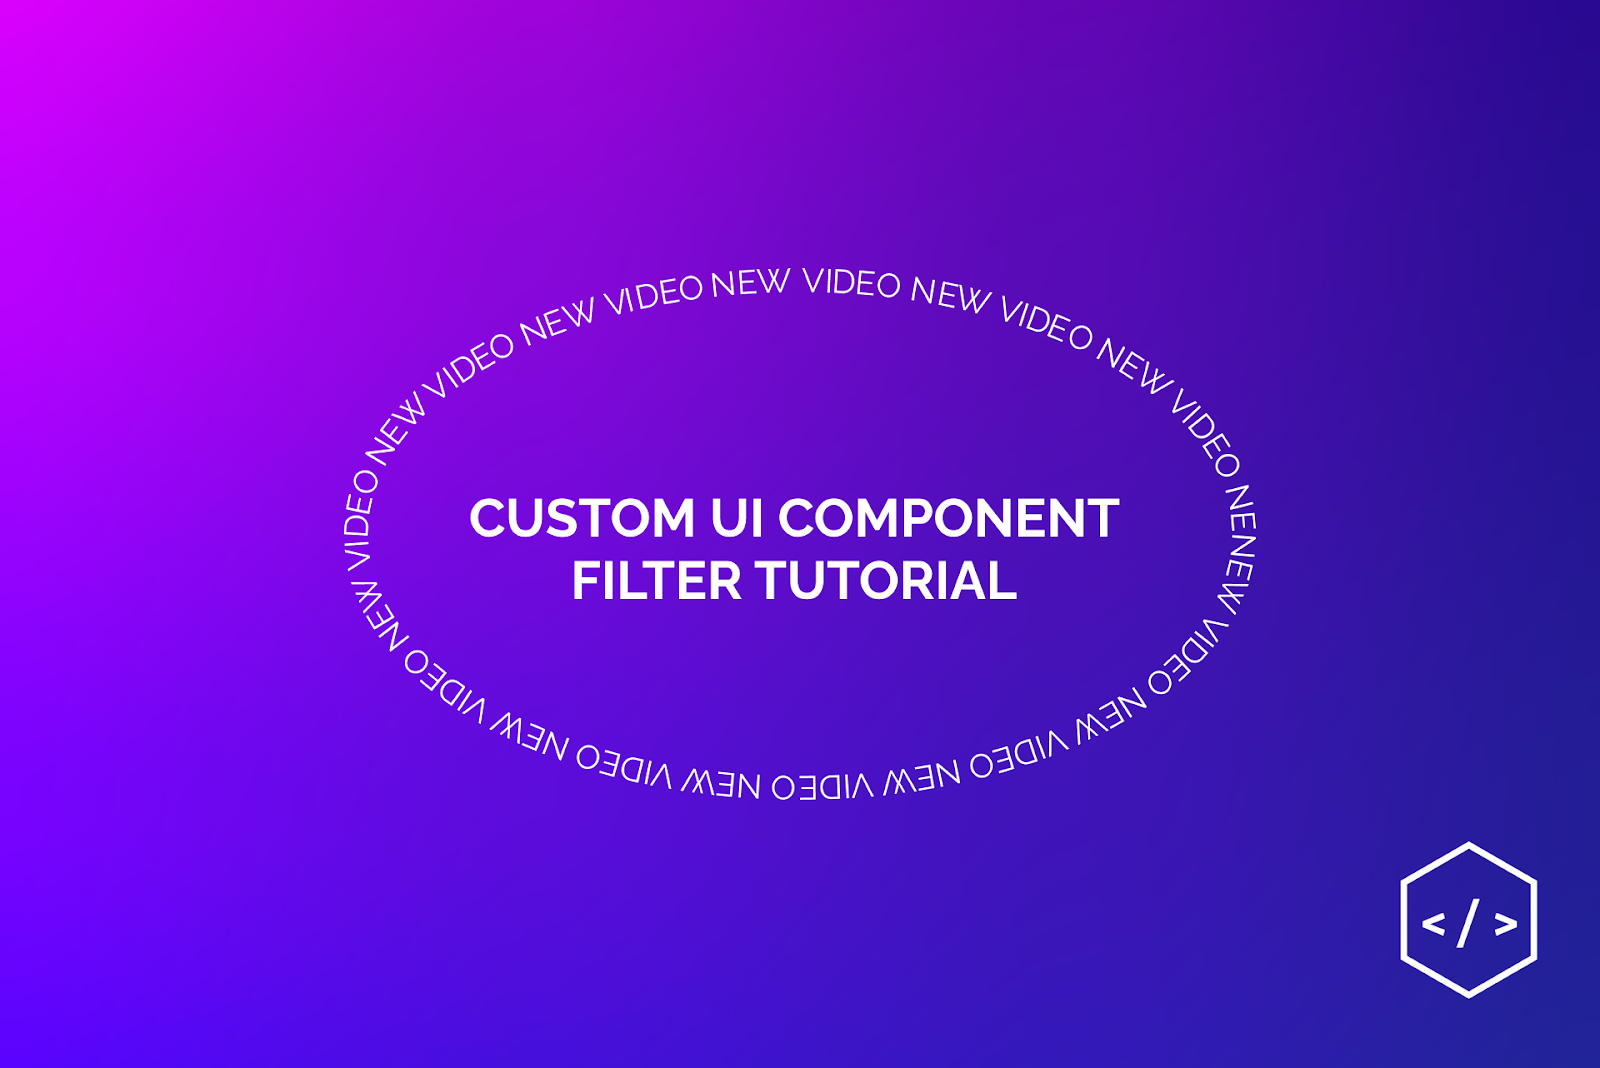 How to custom UI Component Filter?